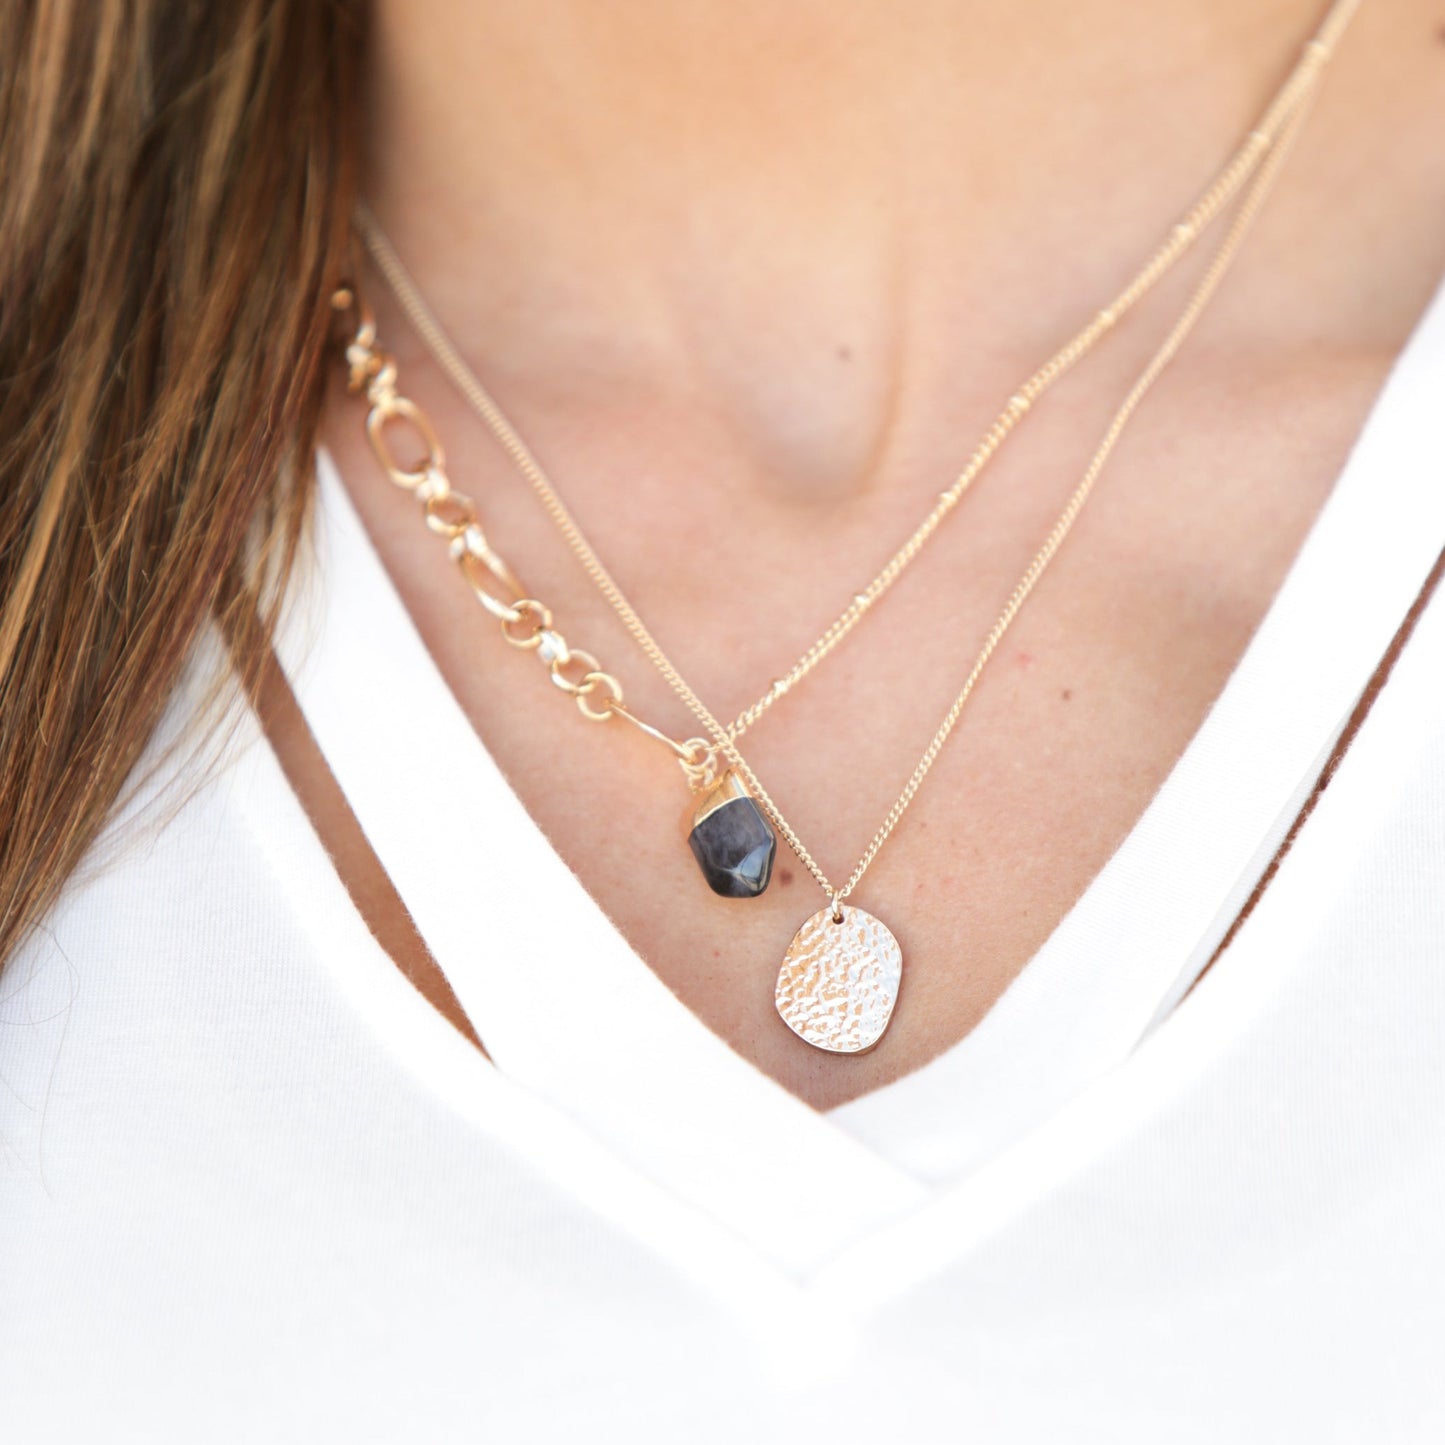 Stone and Pendant Layered Necklace